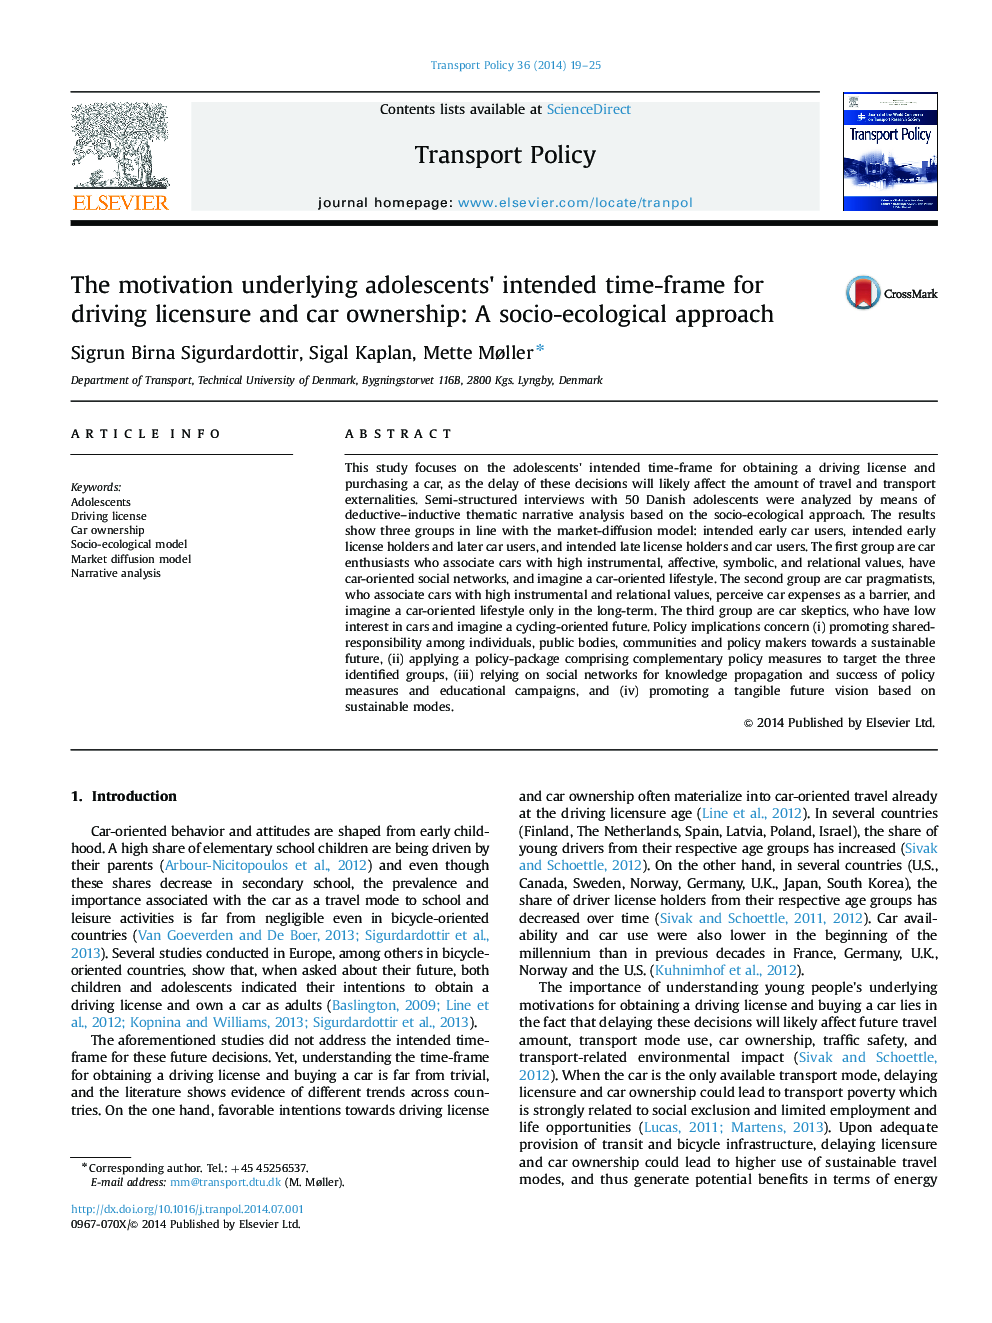 The motivation underlying adolescents×³ intended time-frame for driving licensure and car ownership: A socio-ecological approach